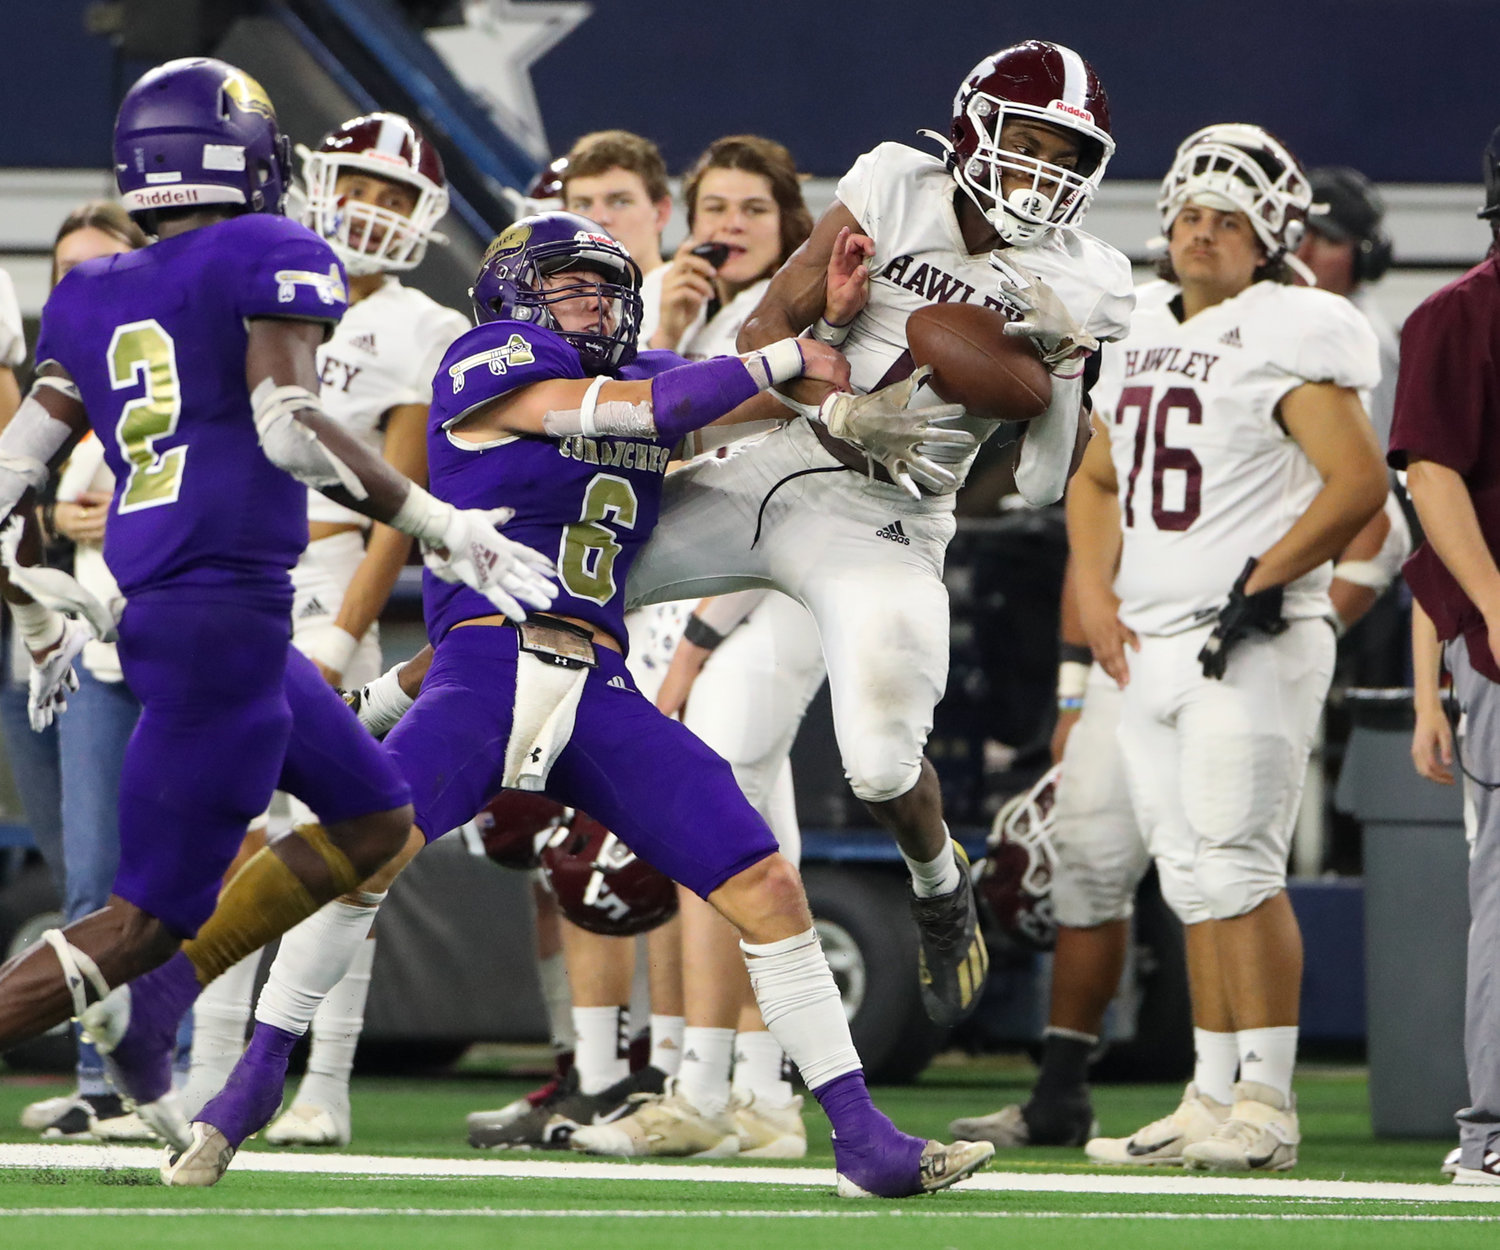 Shiner Comanches junior Drew Wenske (6) breaks up a pass intended for Hawley Bearcats senior Aeneas Segura (1) during the Class 2A Division I state football championship game between Shiner and Hawley on December 15, 2021 in Arlington, Texas.